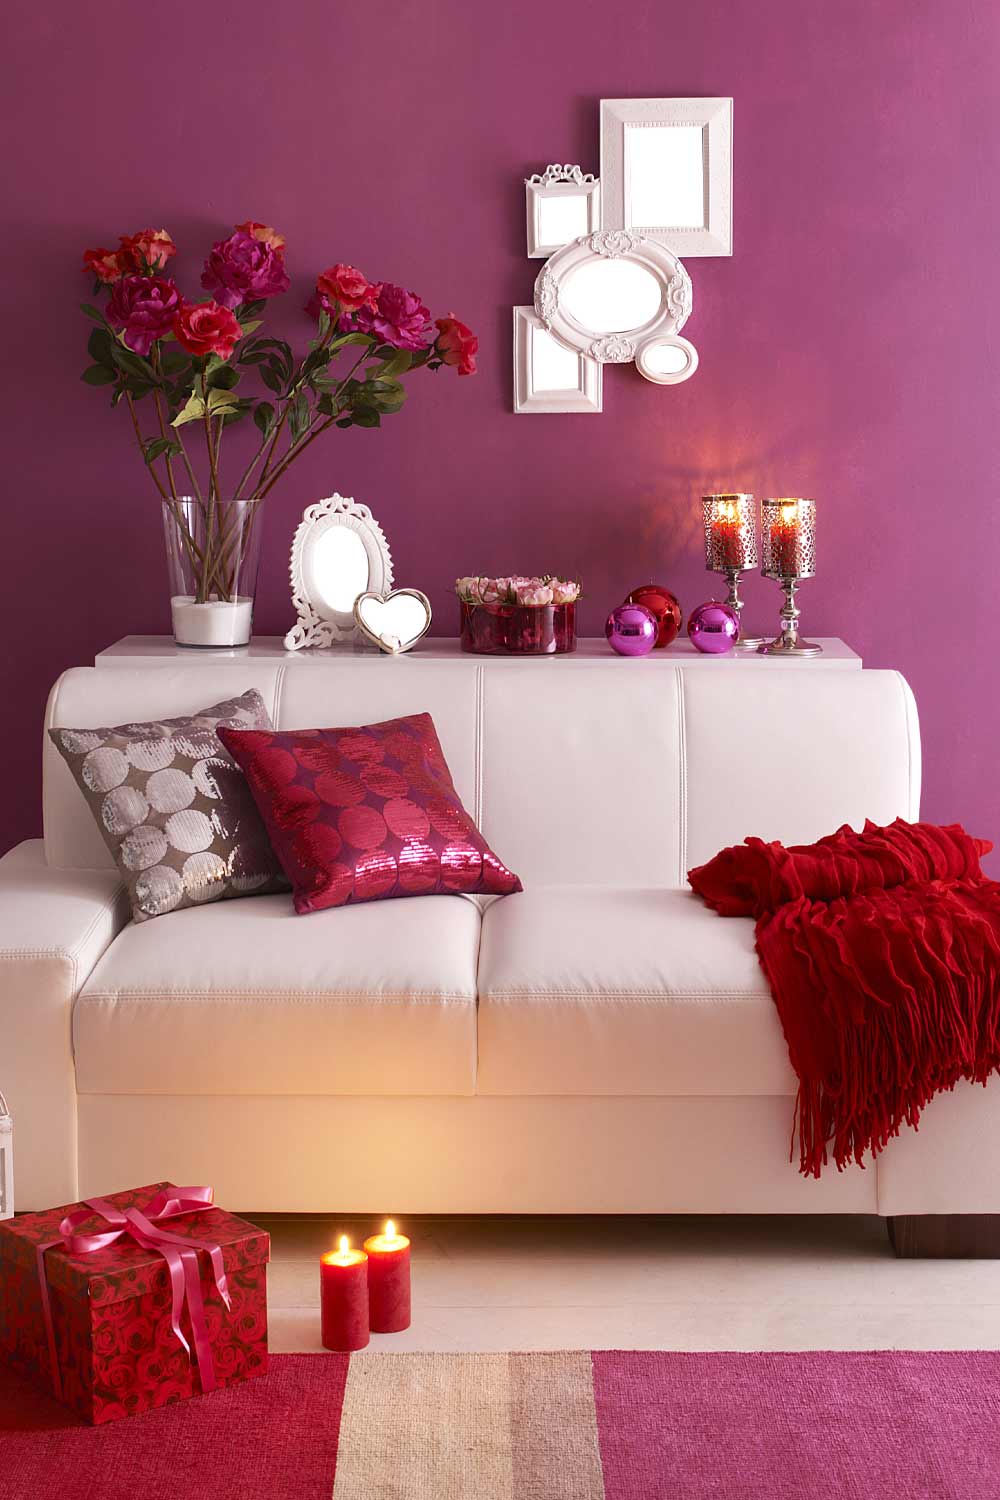 Valentines Day Room Decoration with Roses and Candles